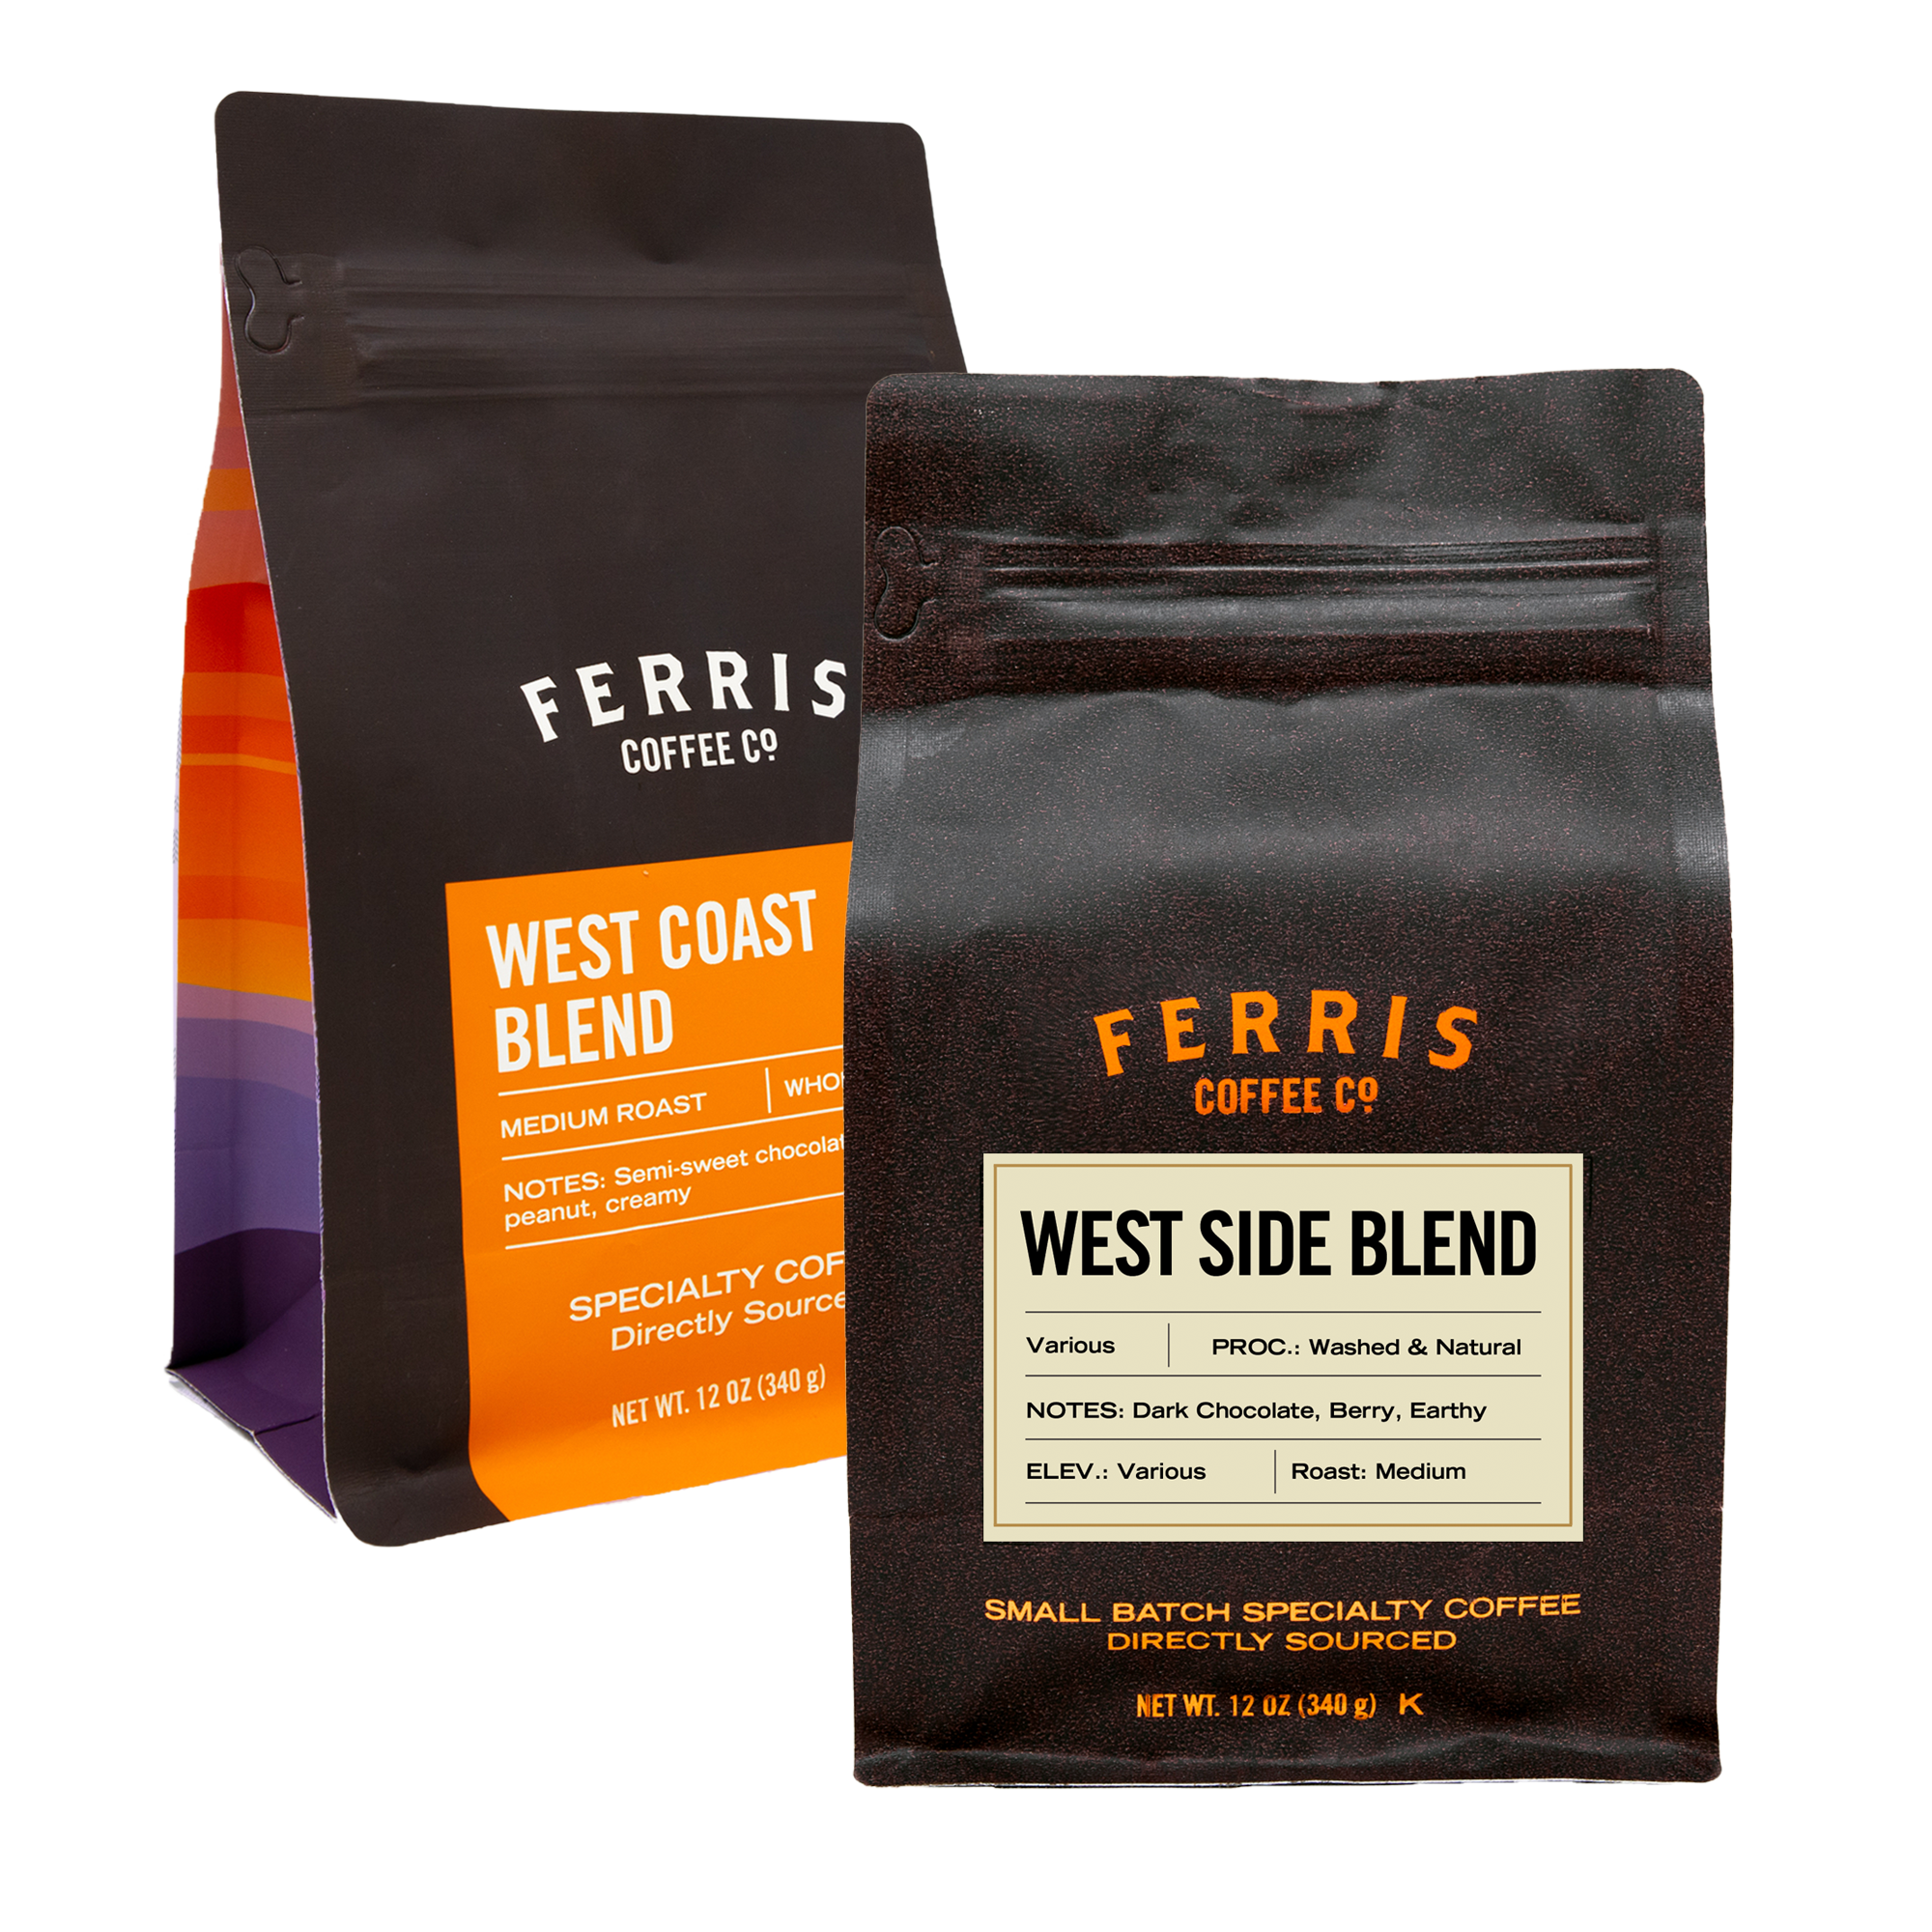 Two bags of medium roast specialty coffee. West Coast Blend and West Side Blend.